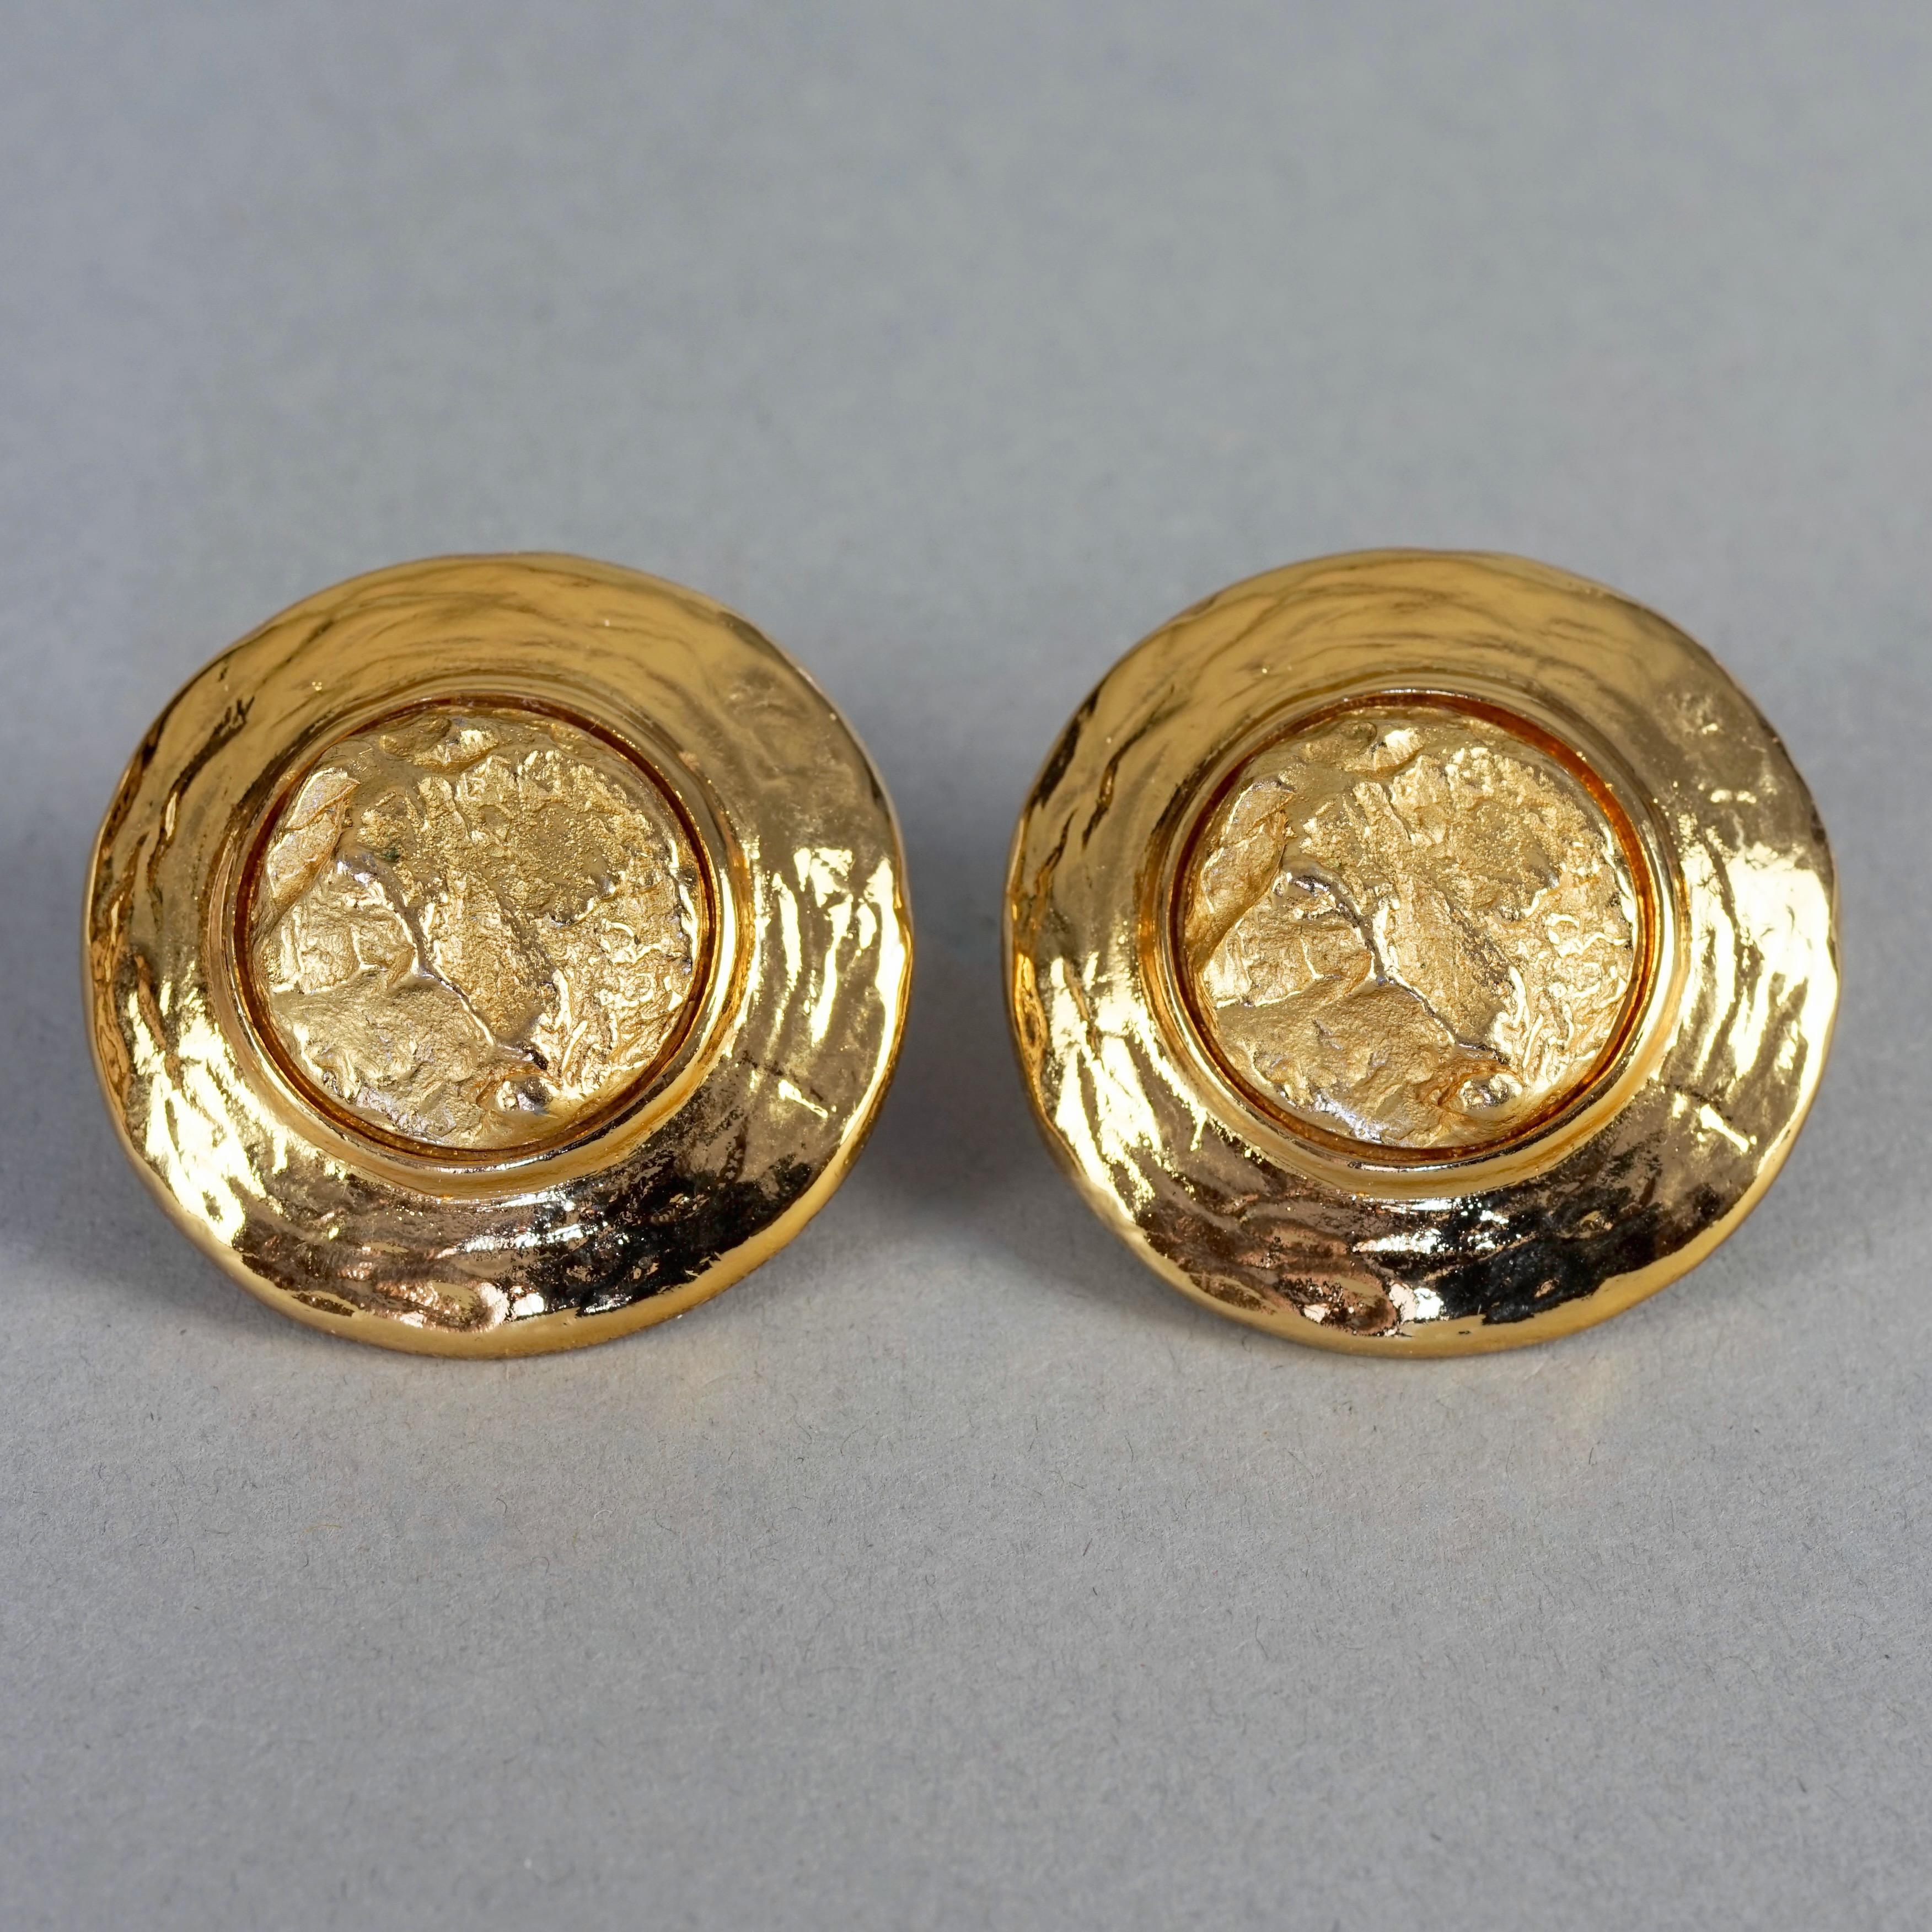 Vintage YVES SAINT LAURENT Ysl Textured Gold Round Earrings For Sale 1